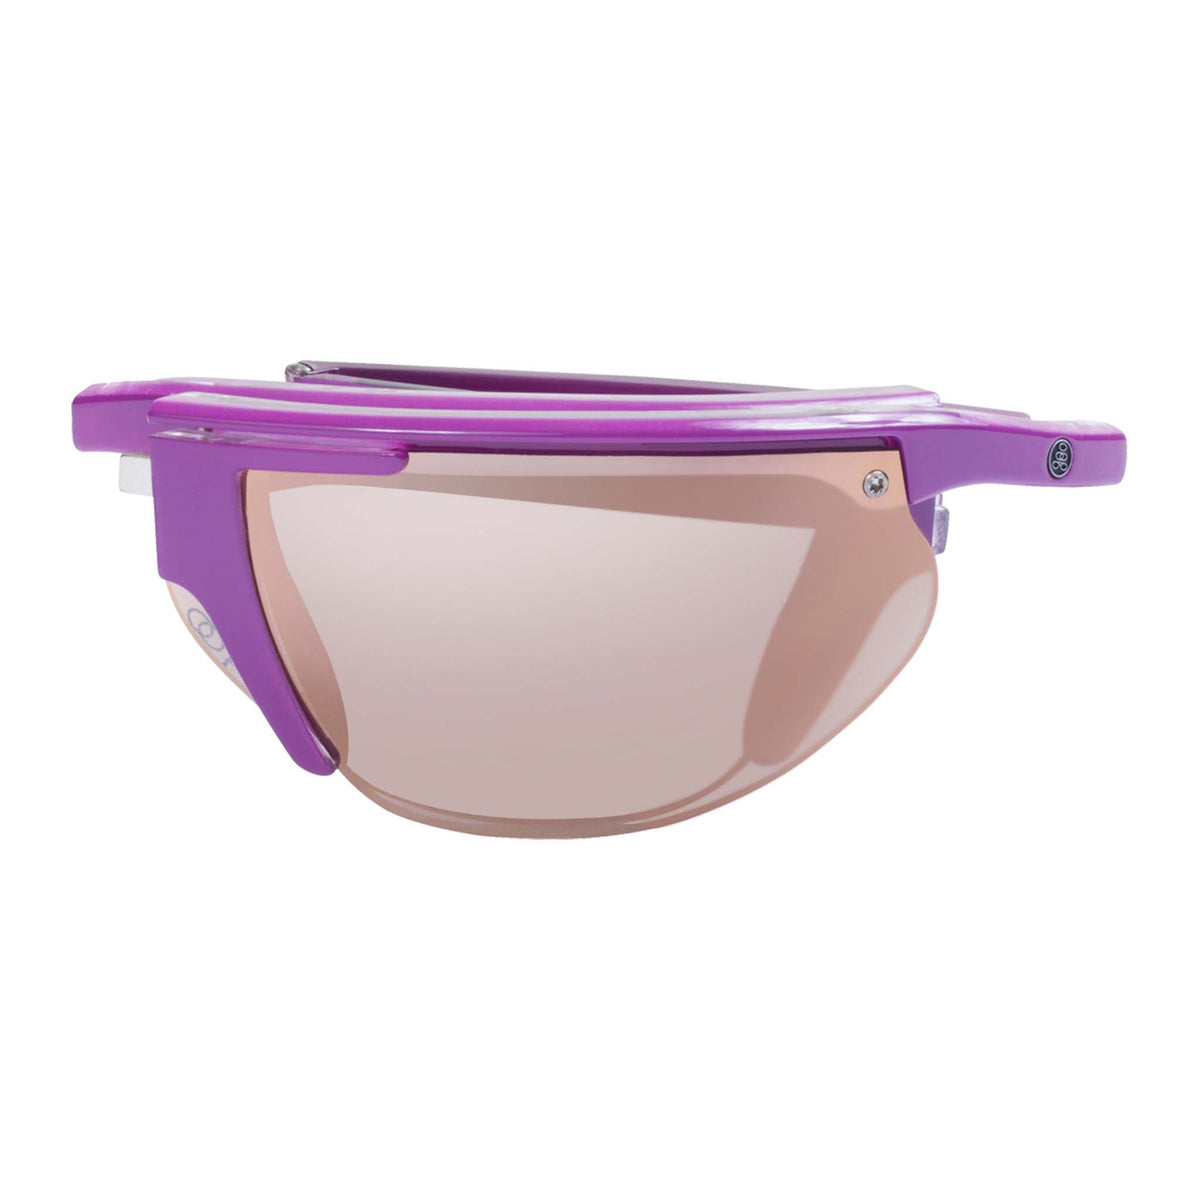 Popticals, Premium Compact Sunglasses, PopTrail, 030081-PFKN, Polarized Sunglasses, Gloss Lavender over Crystal Frame, Gray Lenses w/Pink Mirror Finish, Compact View